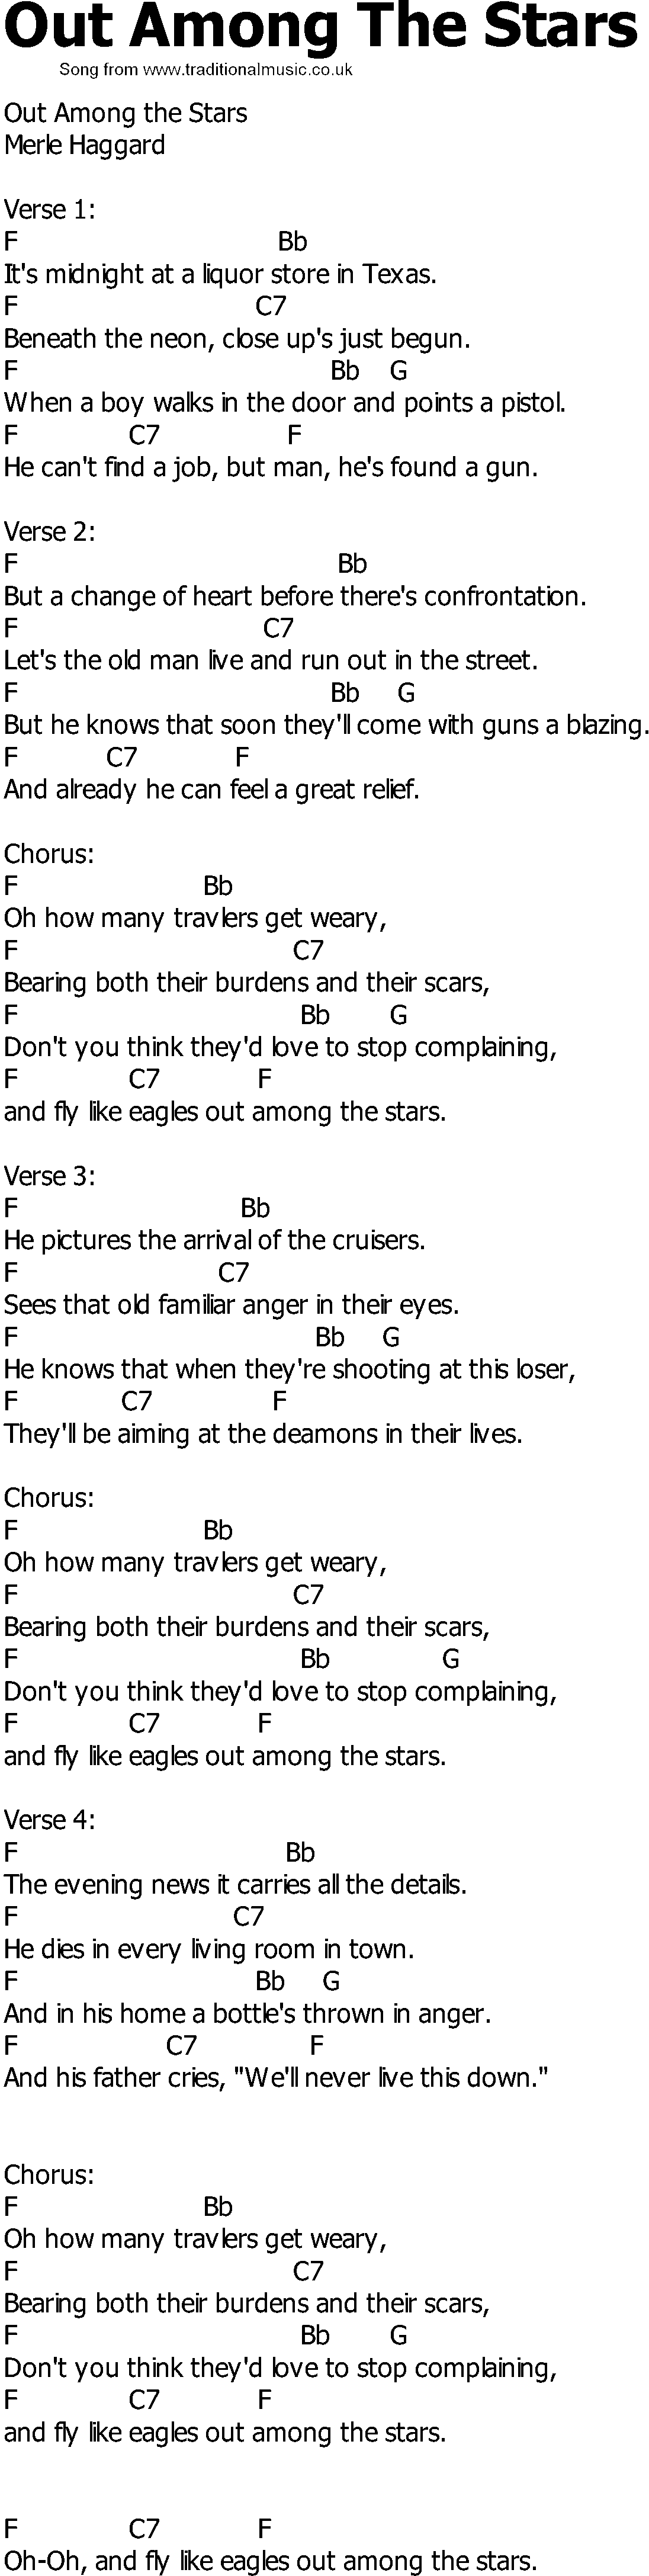 Old Country song lyrics with chords - Out Among The Stars